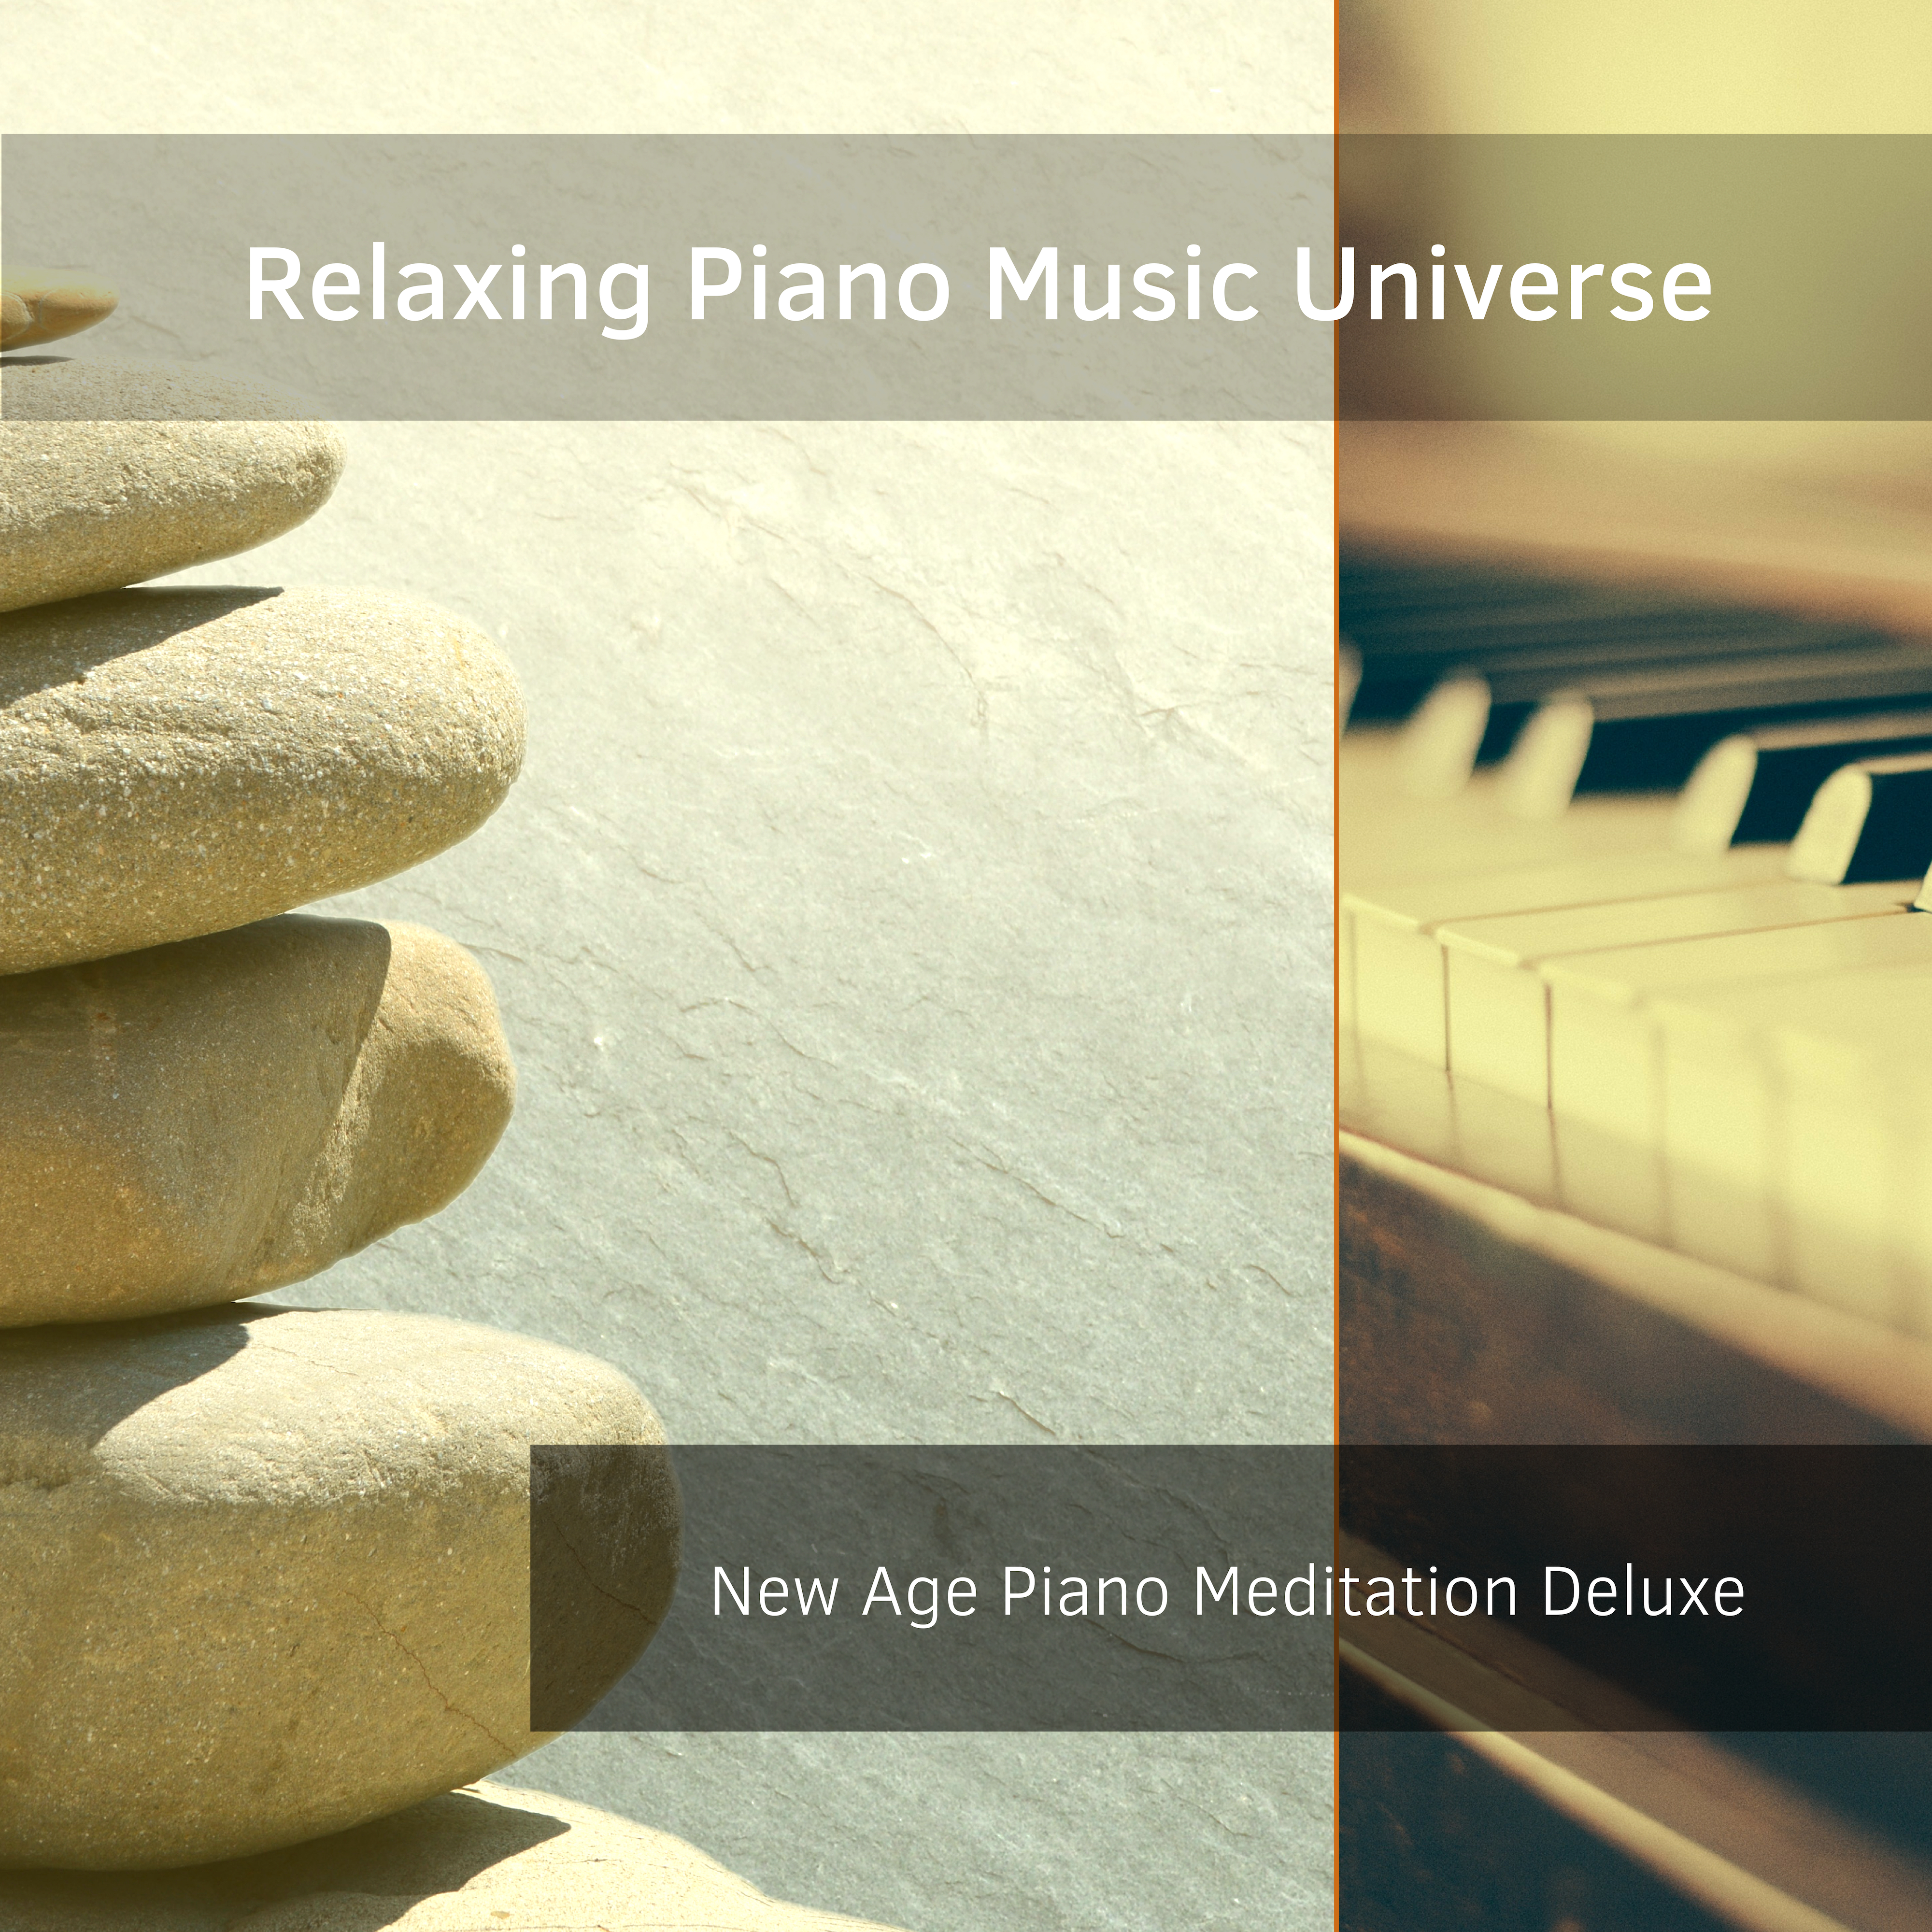 New Age Piano Meditation Deluxe